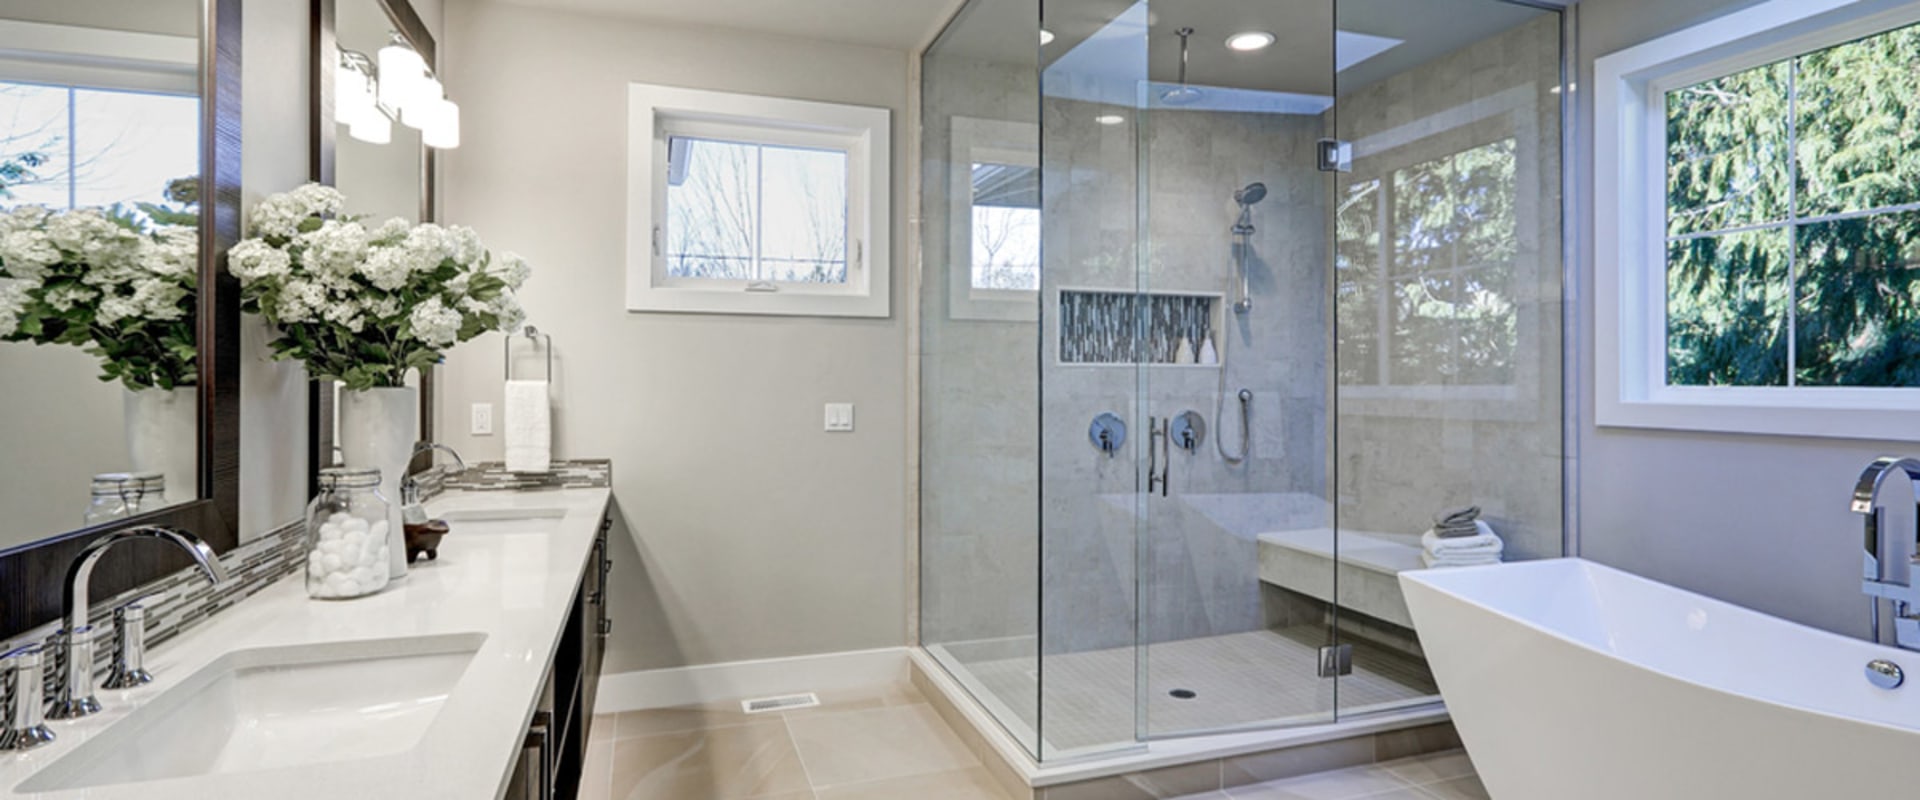 How Much Does it Cost to Install a Frameless Shower Door?